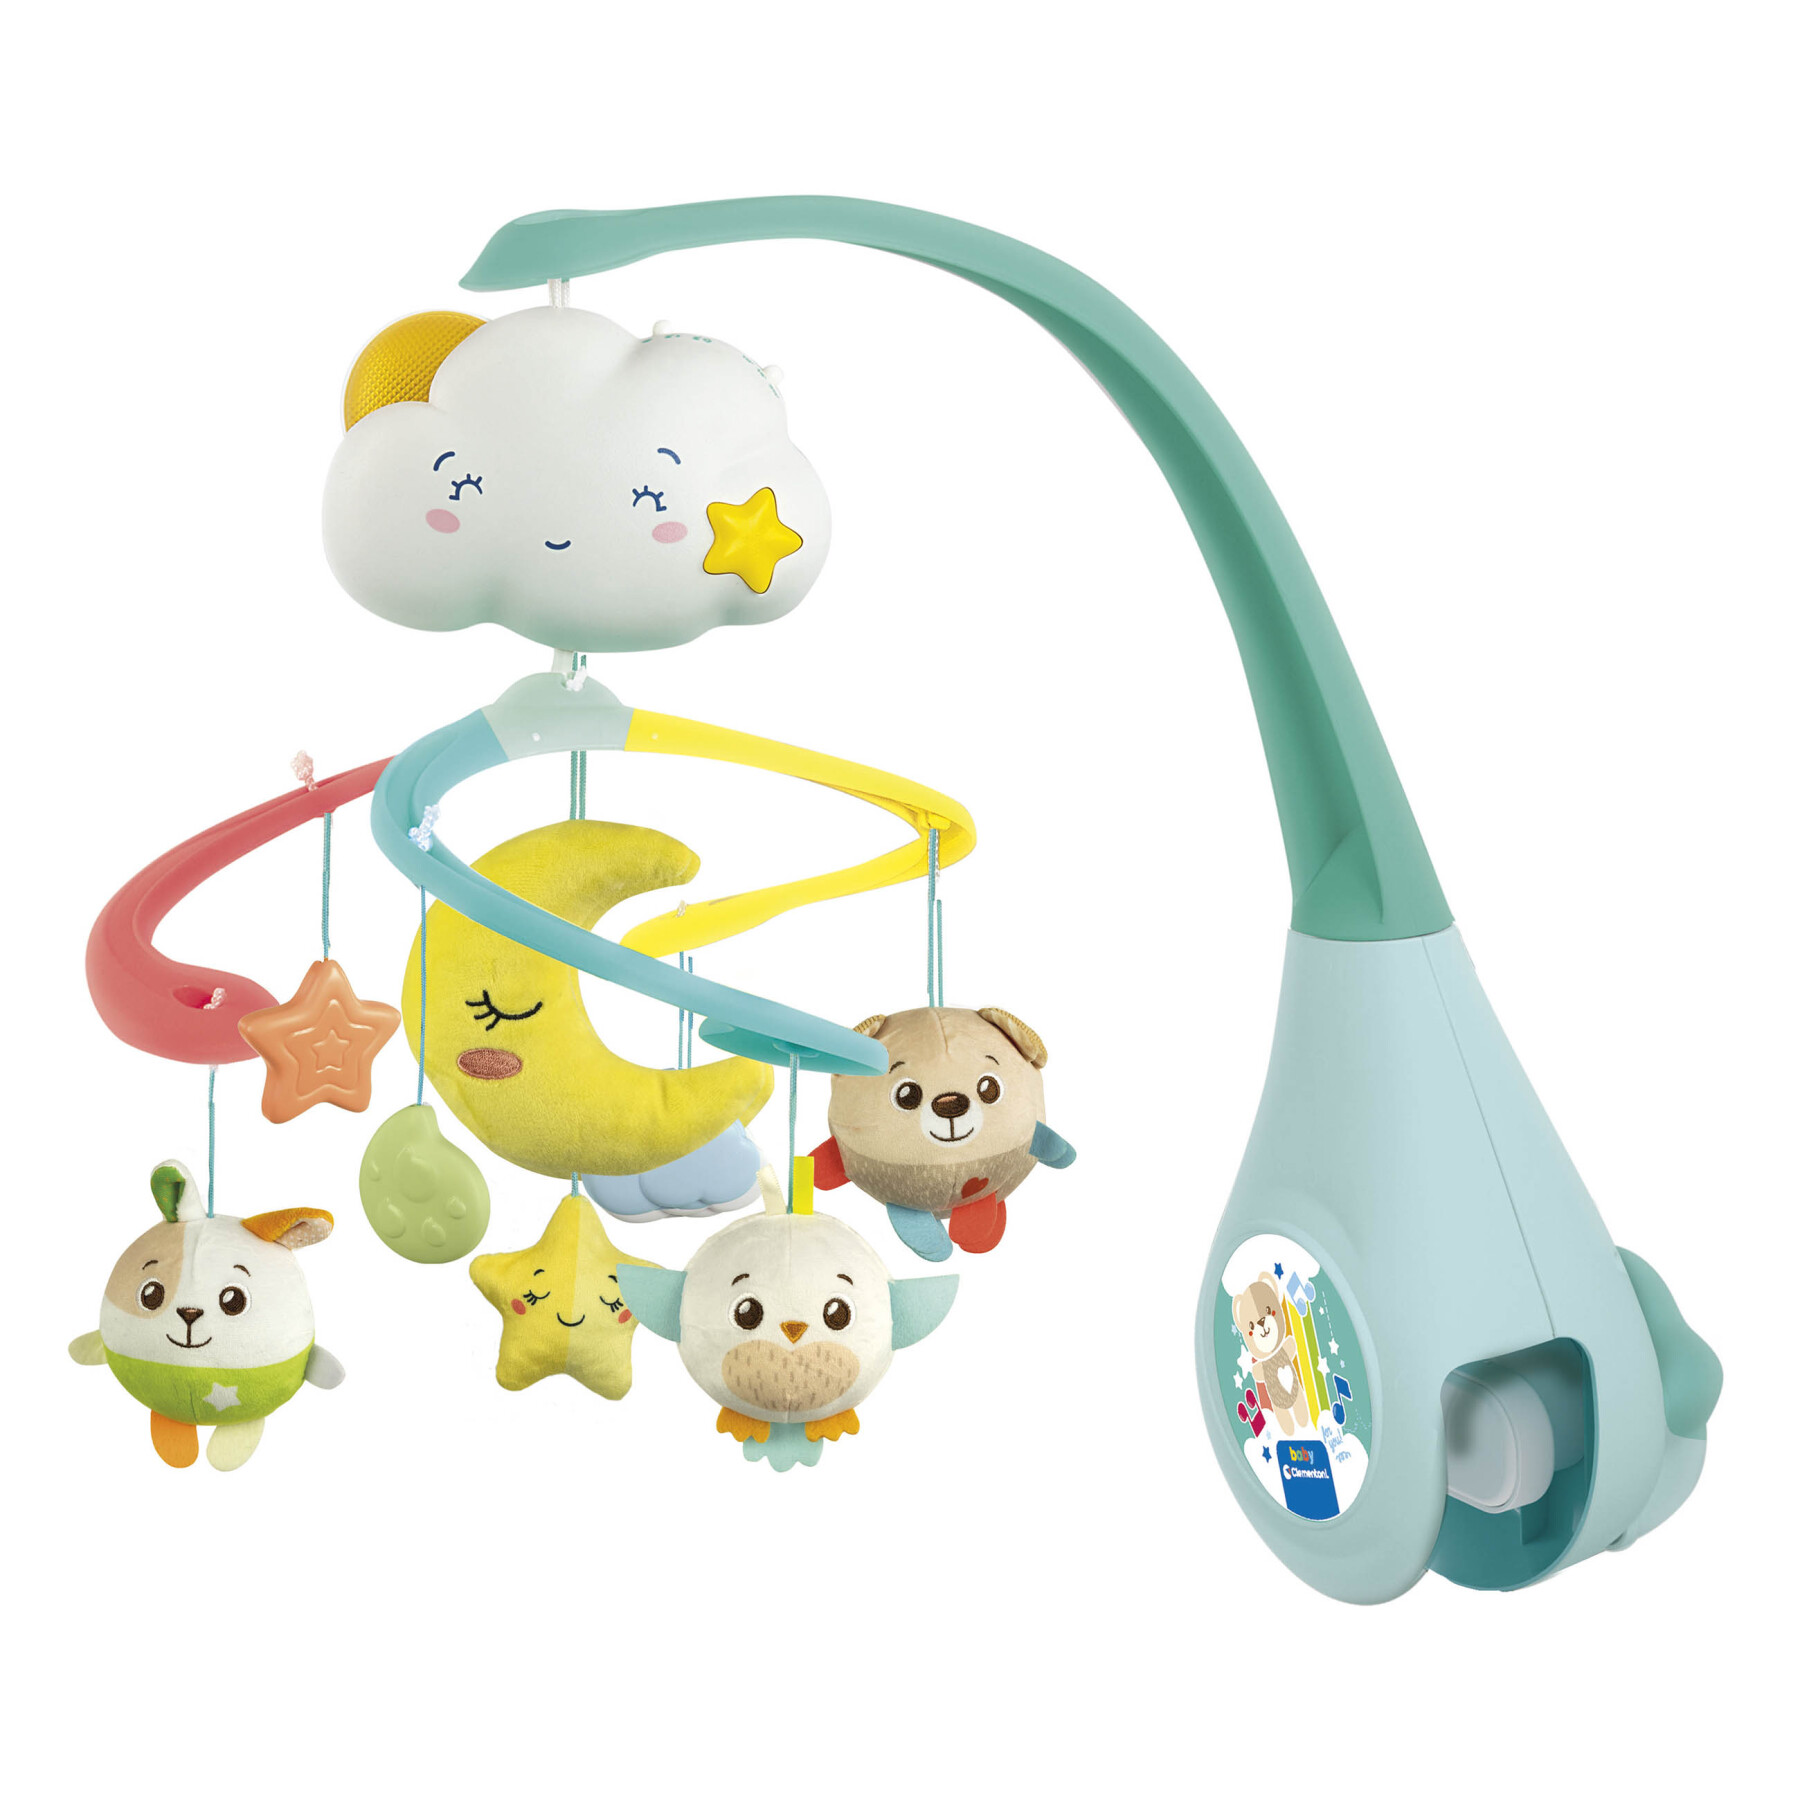 Baby clementoni - sweet and dream cot mobile, giostrina culla o